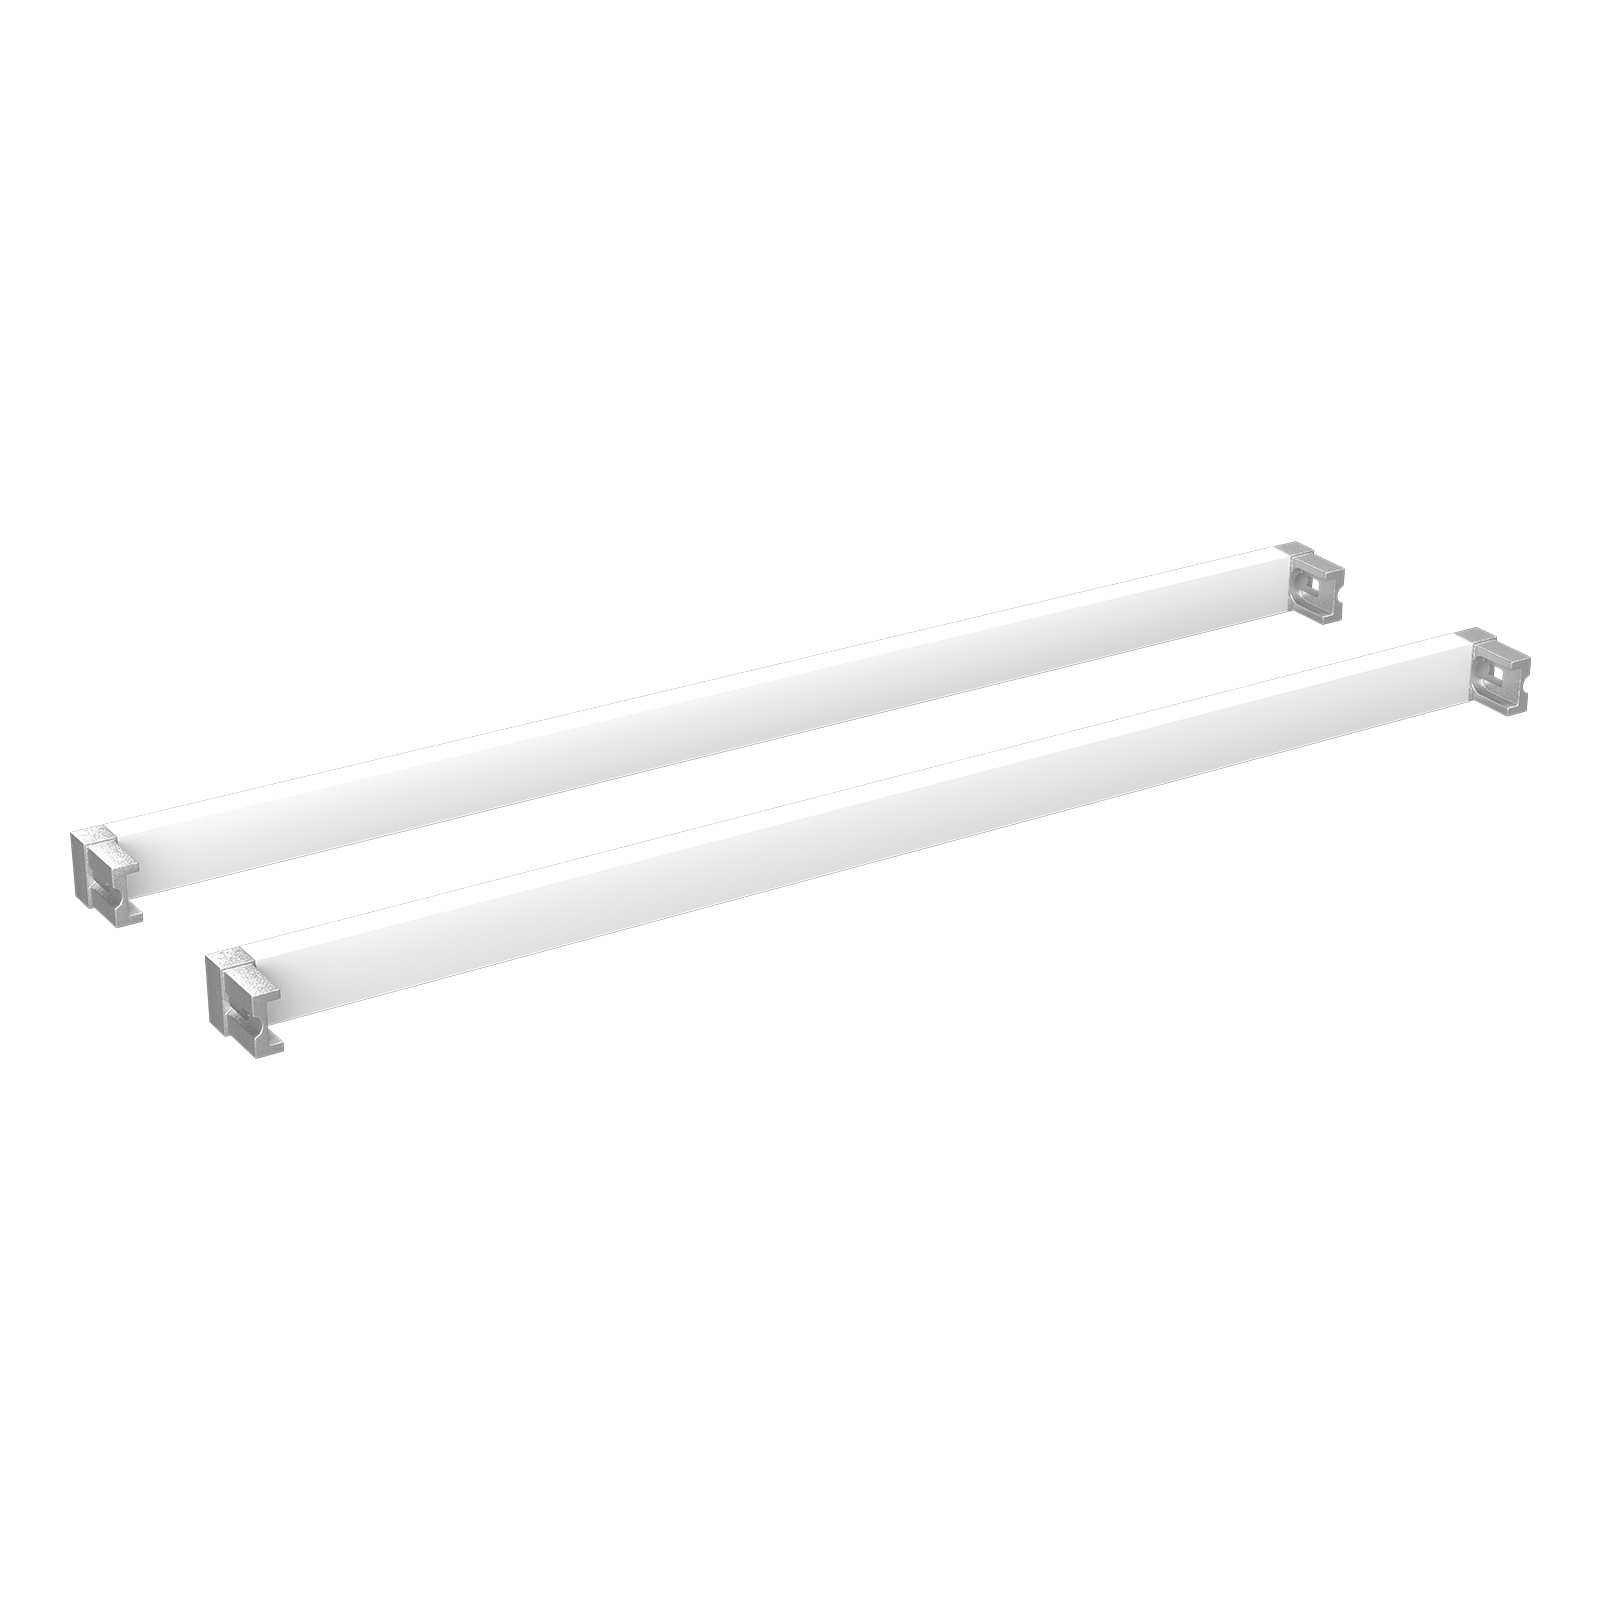 Home Solutions 230mm Cross Bars & L-Connector White